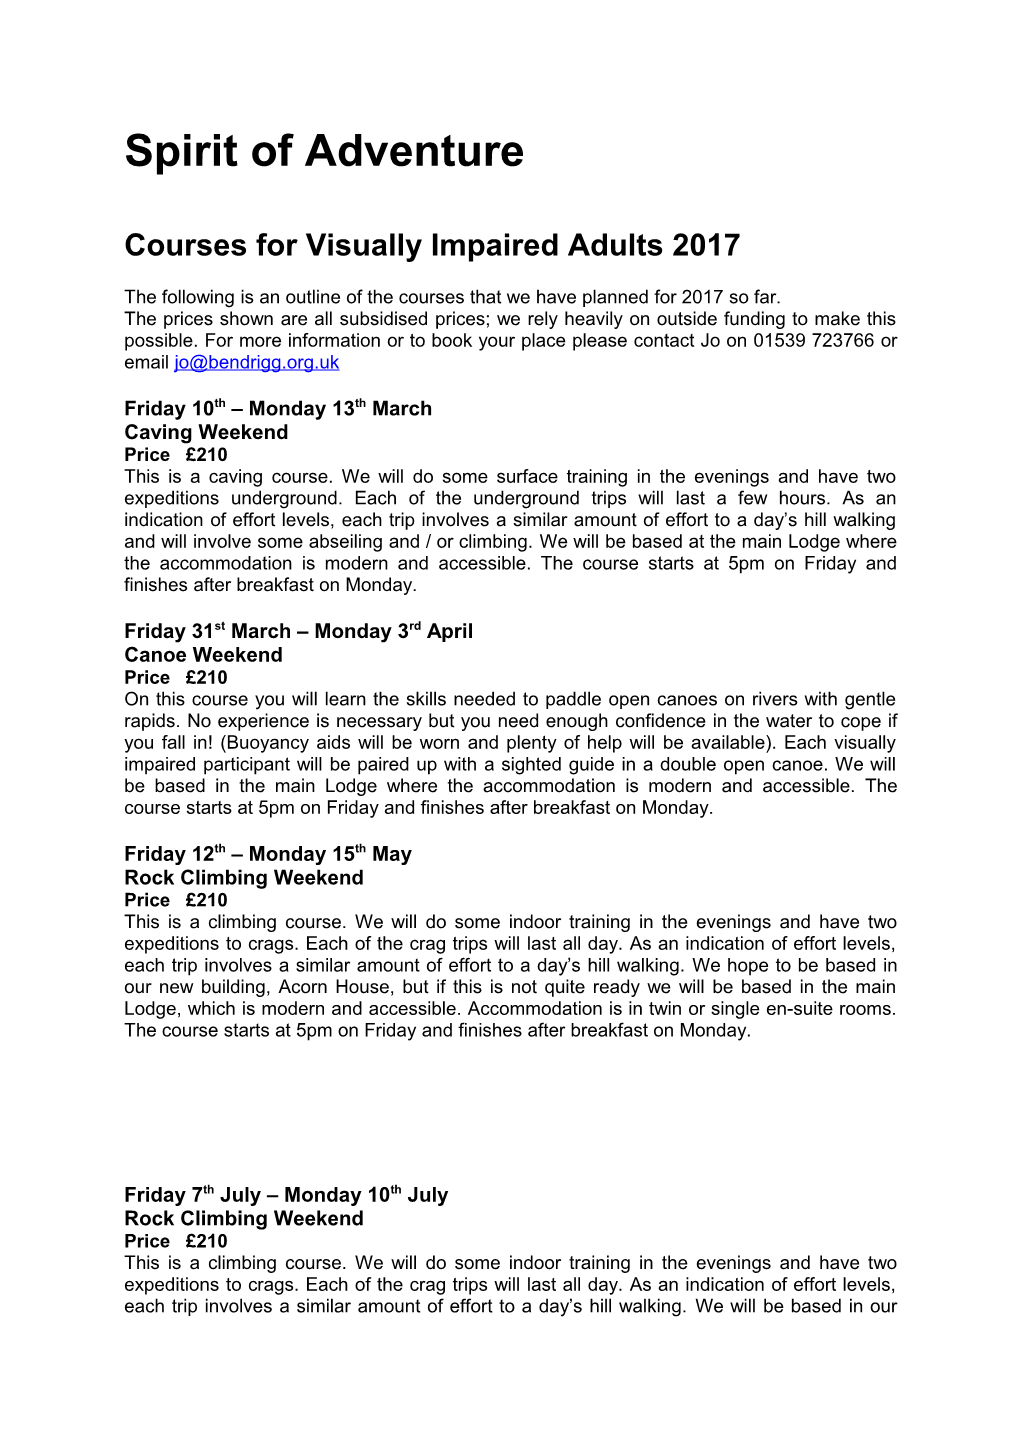 Courses for Visually Impaired Adults 2017